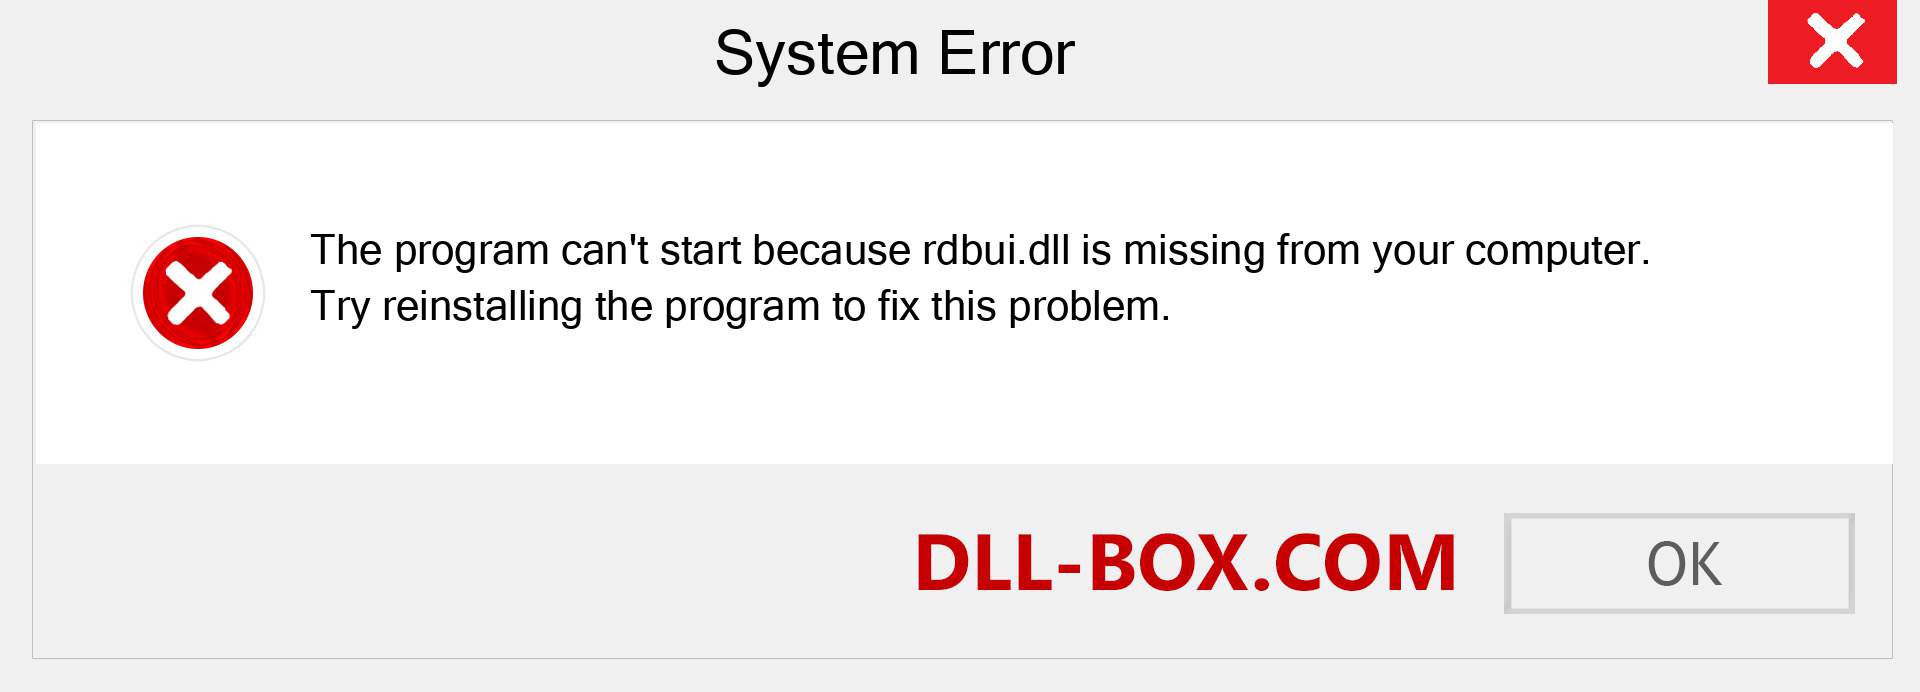  rdbui.dll file is missing?. Download for Windows 7, 8, 10 - Fix  rdbui dll Missing Error on Windows, photos, images